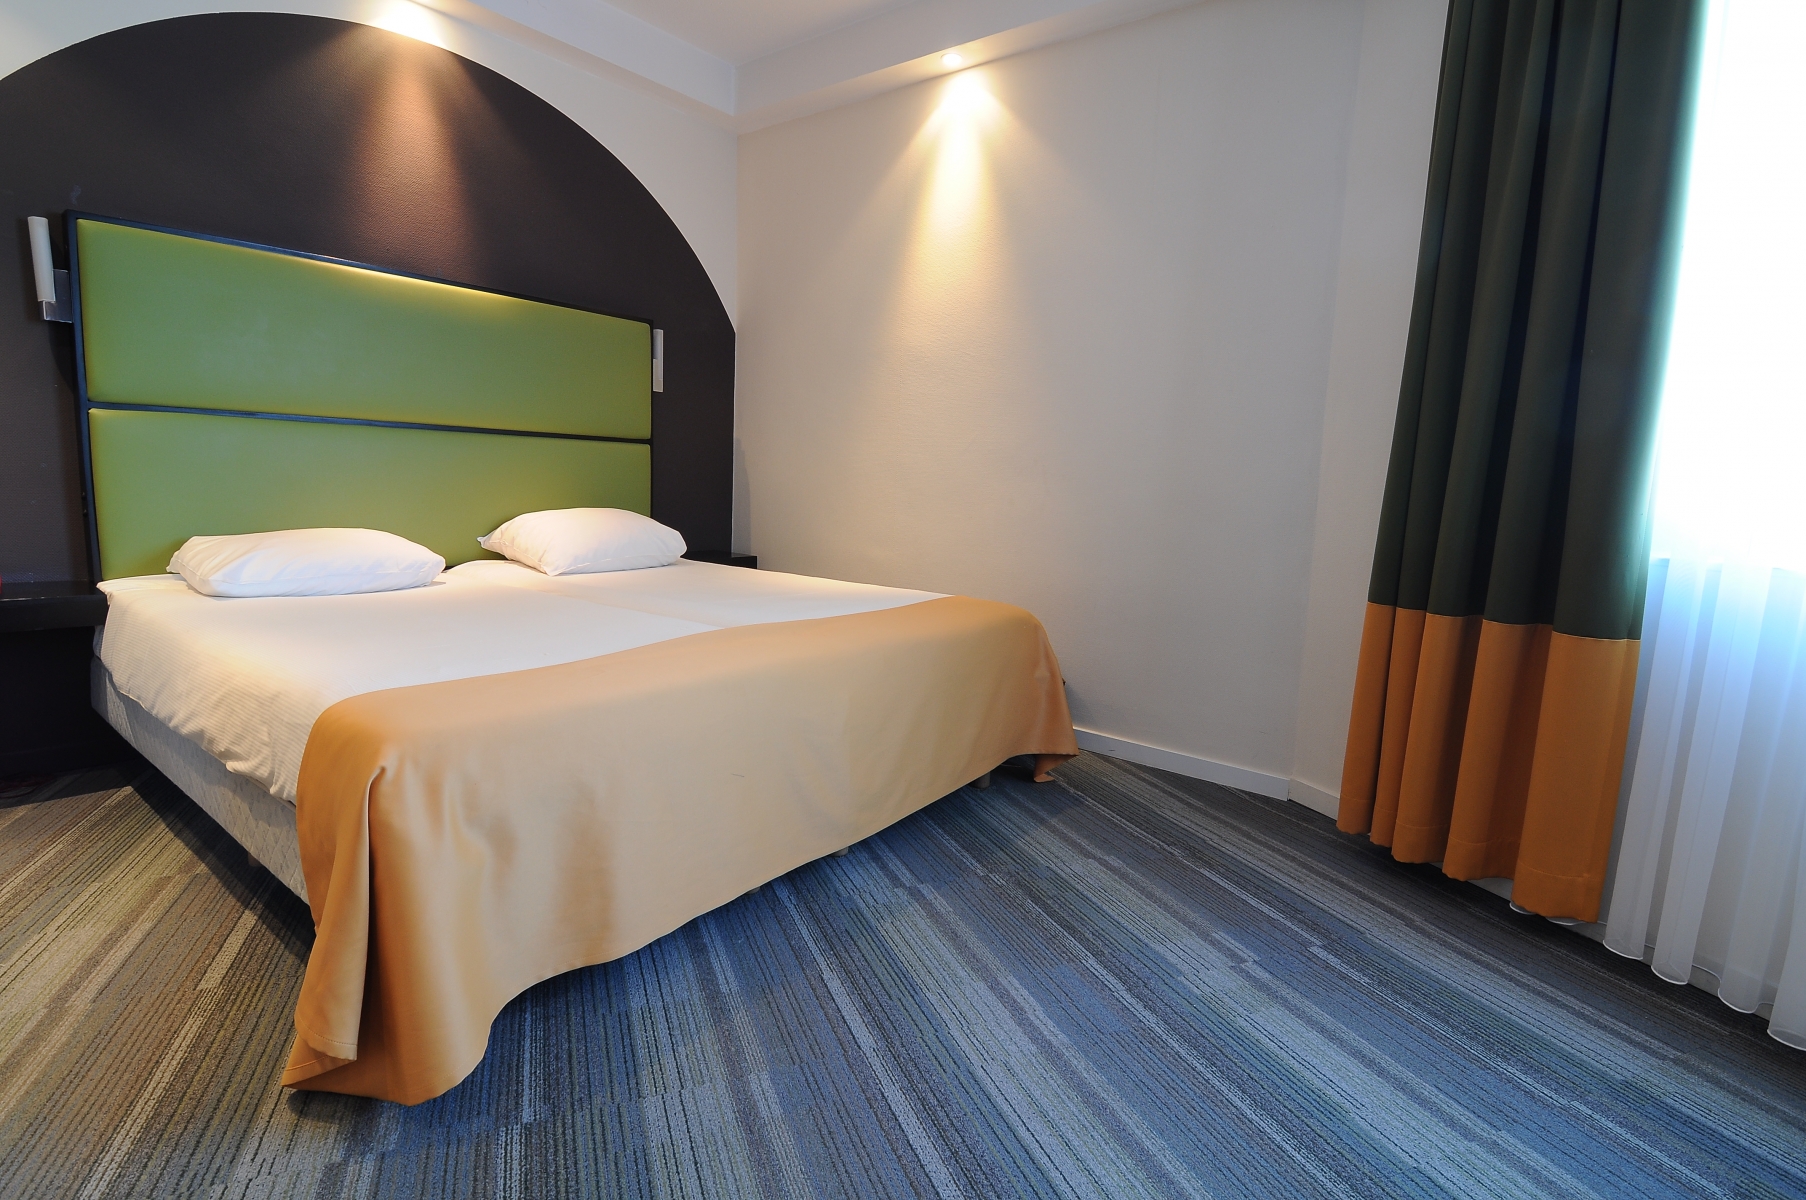 Hotel Arlon <br/>56.00 ew <br/> <a href='http://vakantieoplossing.nl/outpage/?id=6ca8dcb6529391bf15d1fd44f3de1693' target='_blank'>View Details</a>